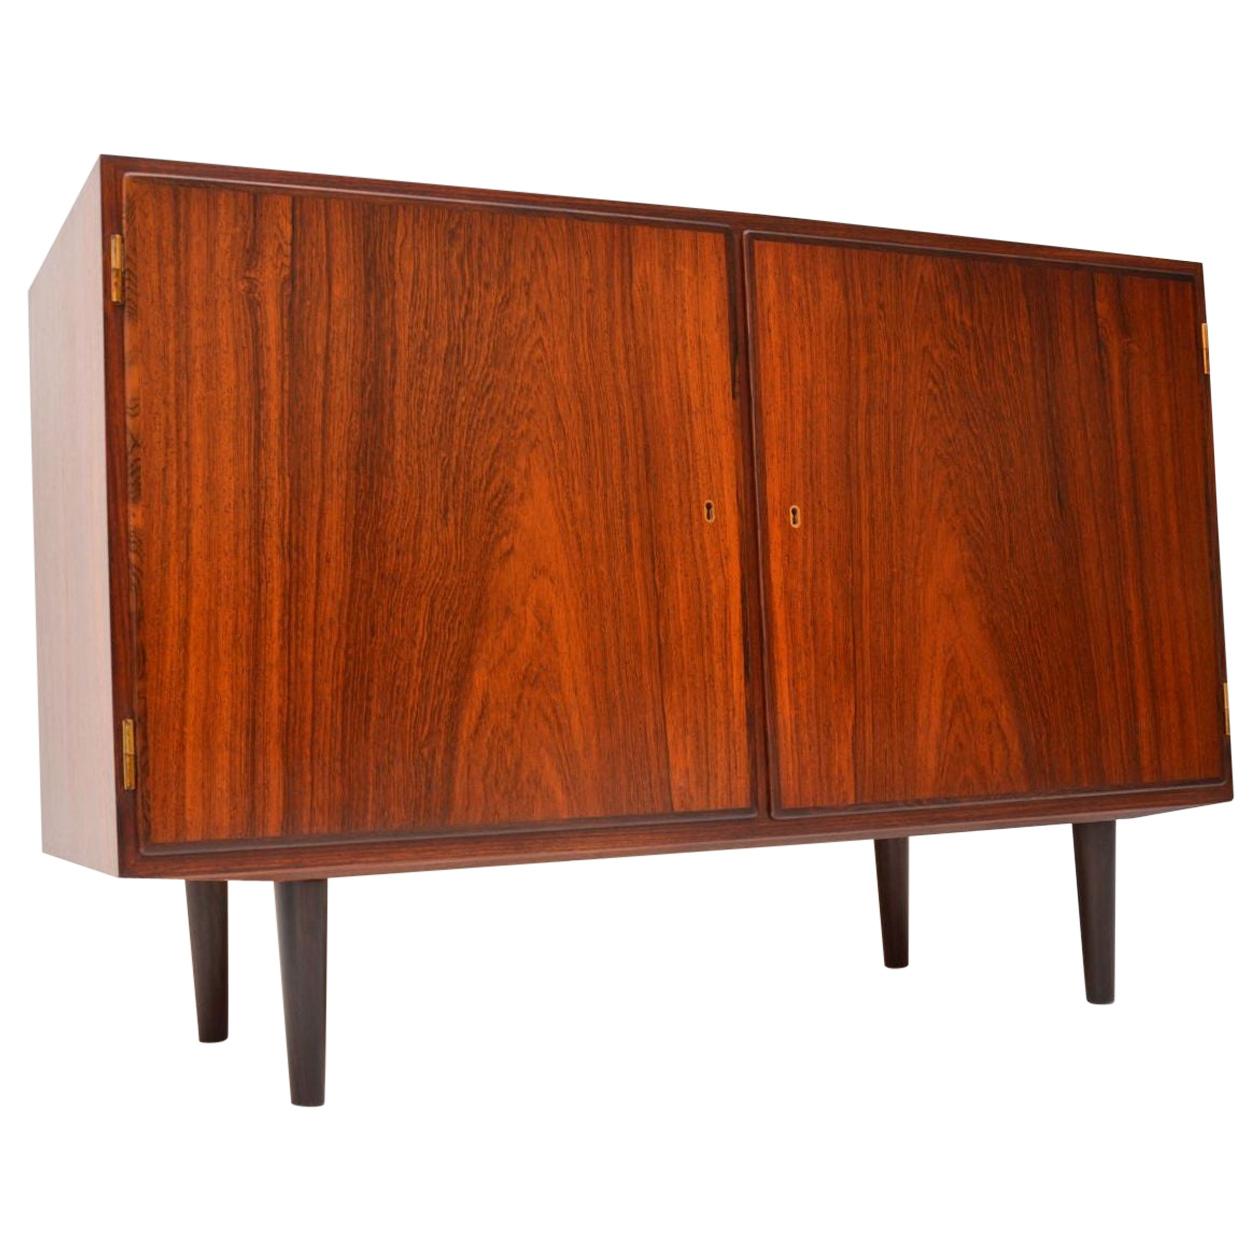 1960s Danish Sideboard Cabinet by Poul Hundevad